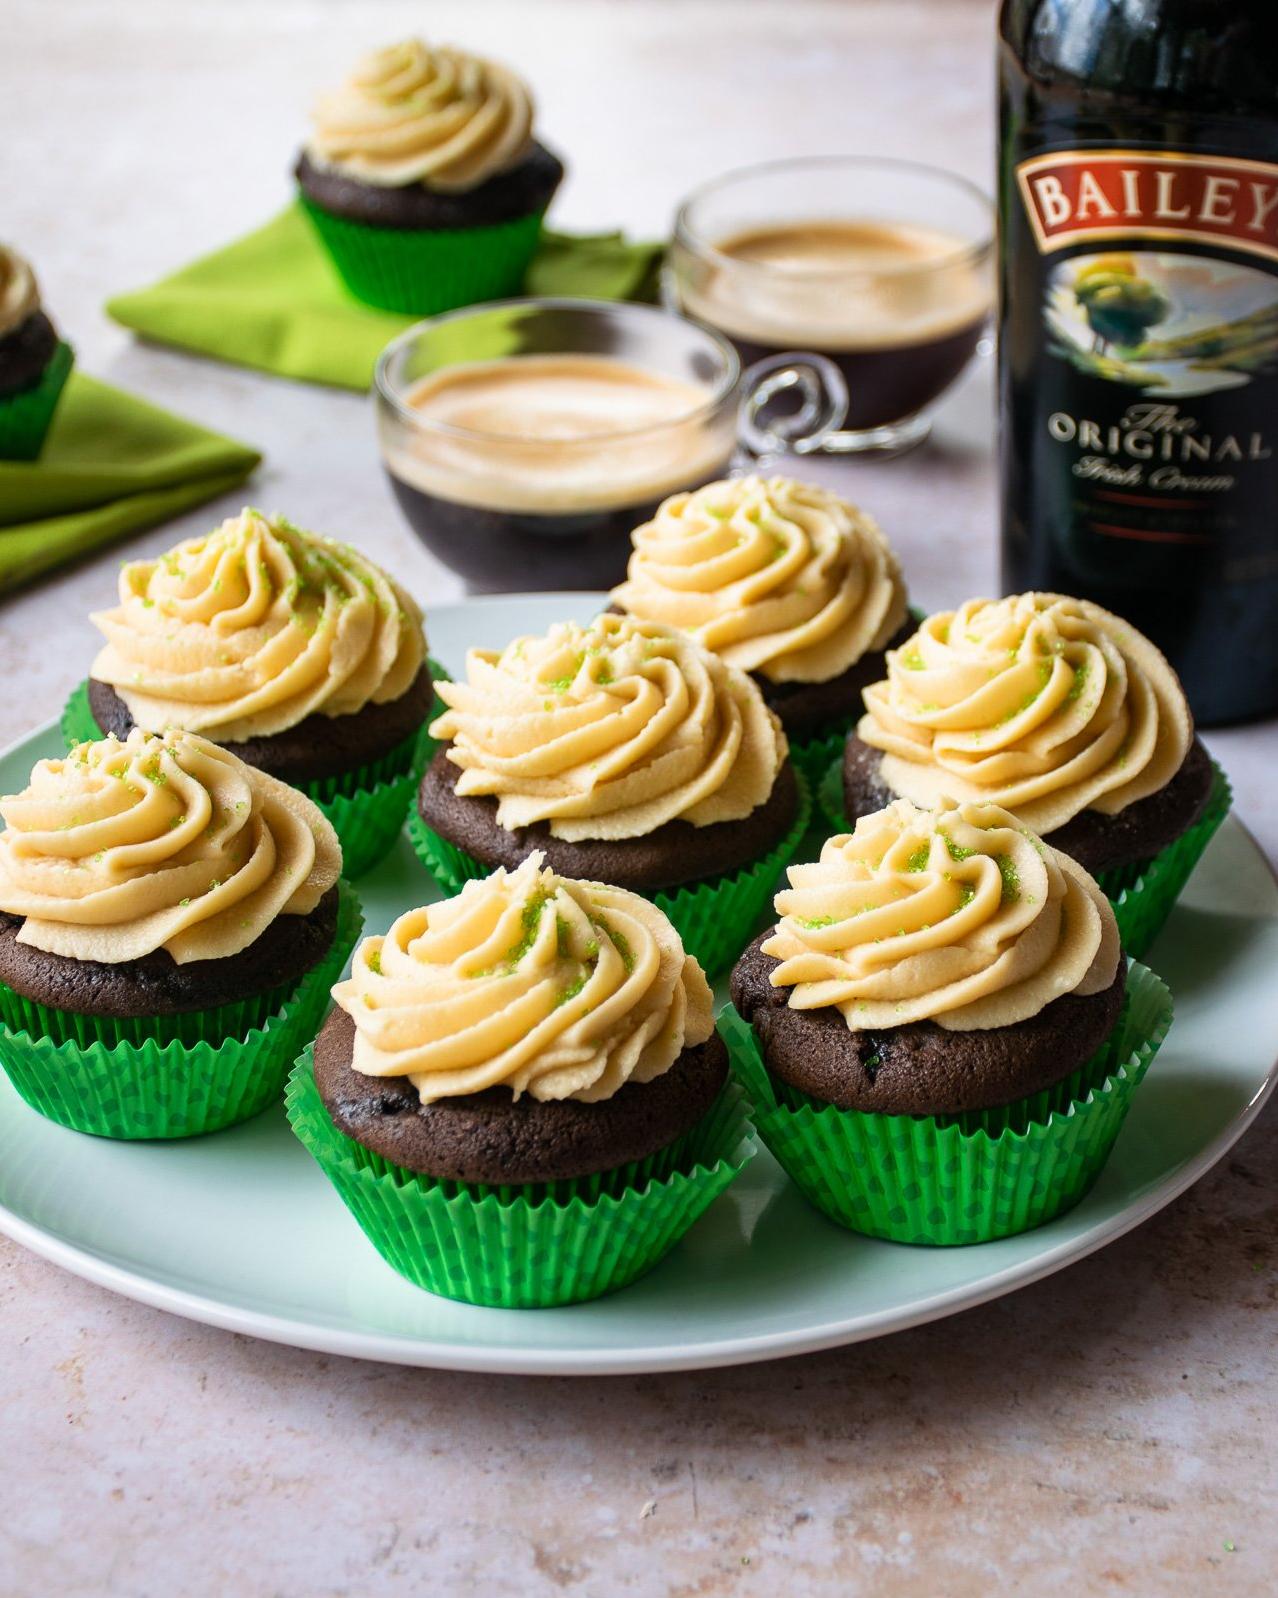  Start your day with a little bit of Irish spirit in these muffins!